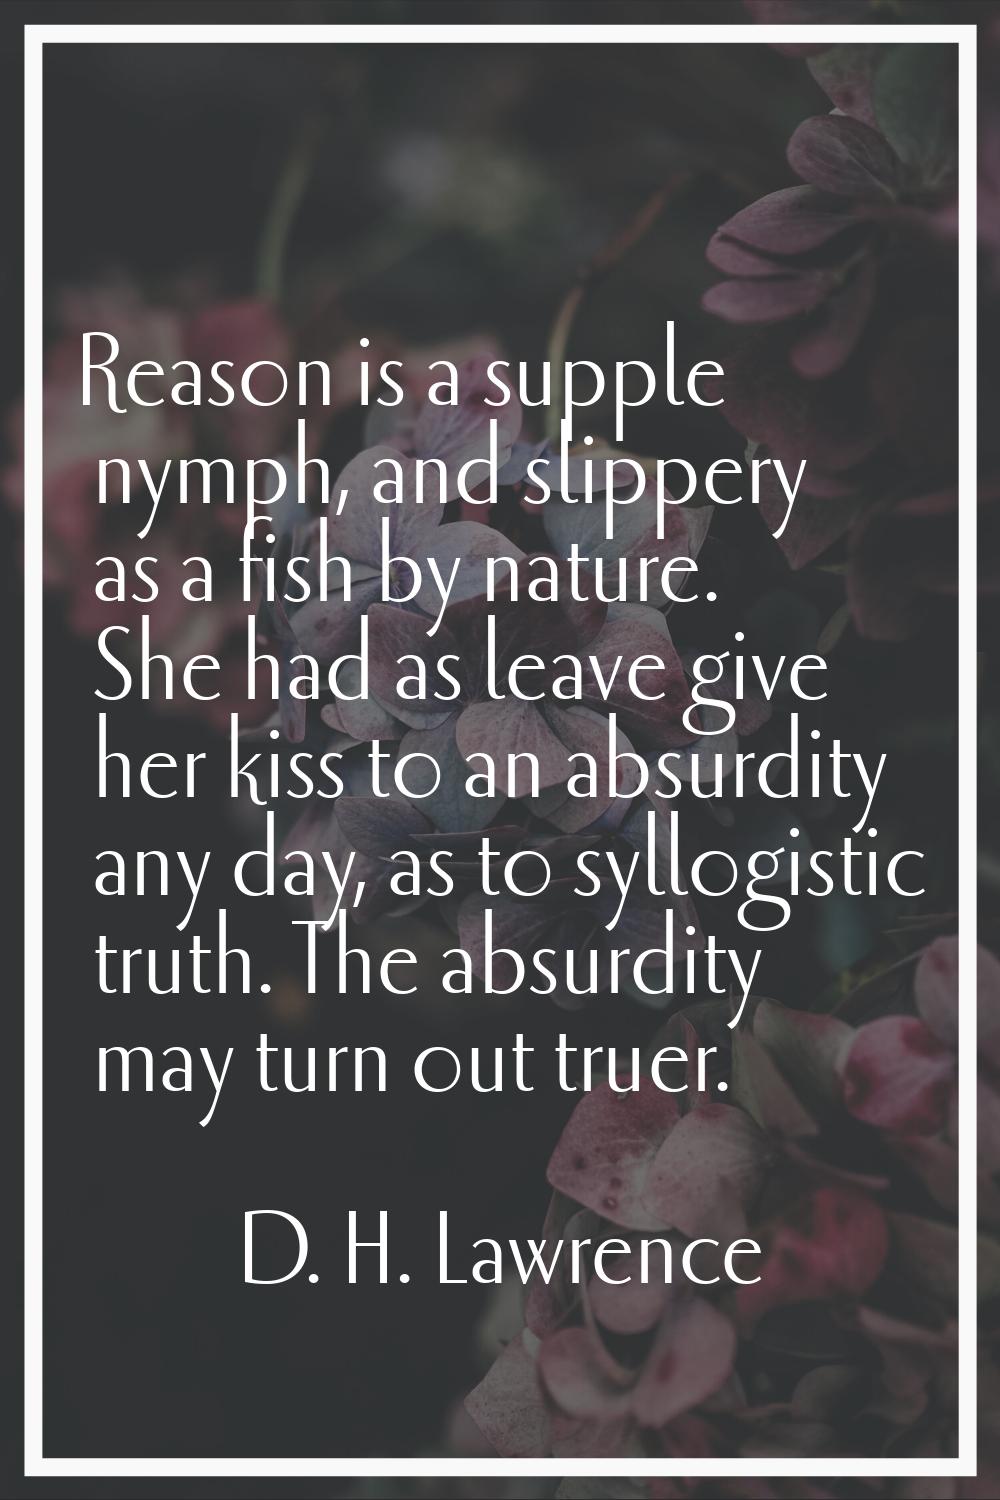 Reason is a supple nymph, and slippery as a fish by nature. She had as leave give her kiss to an ab